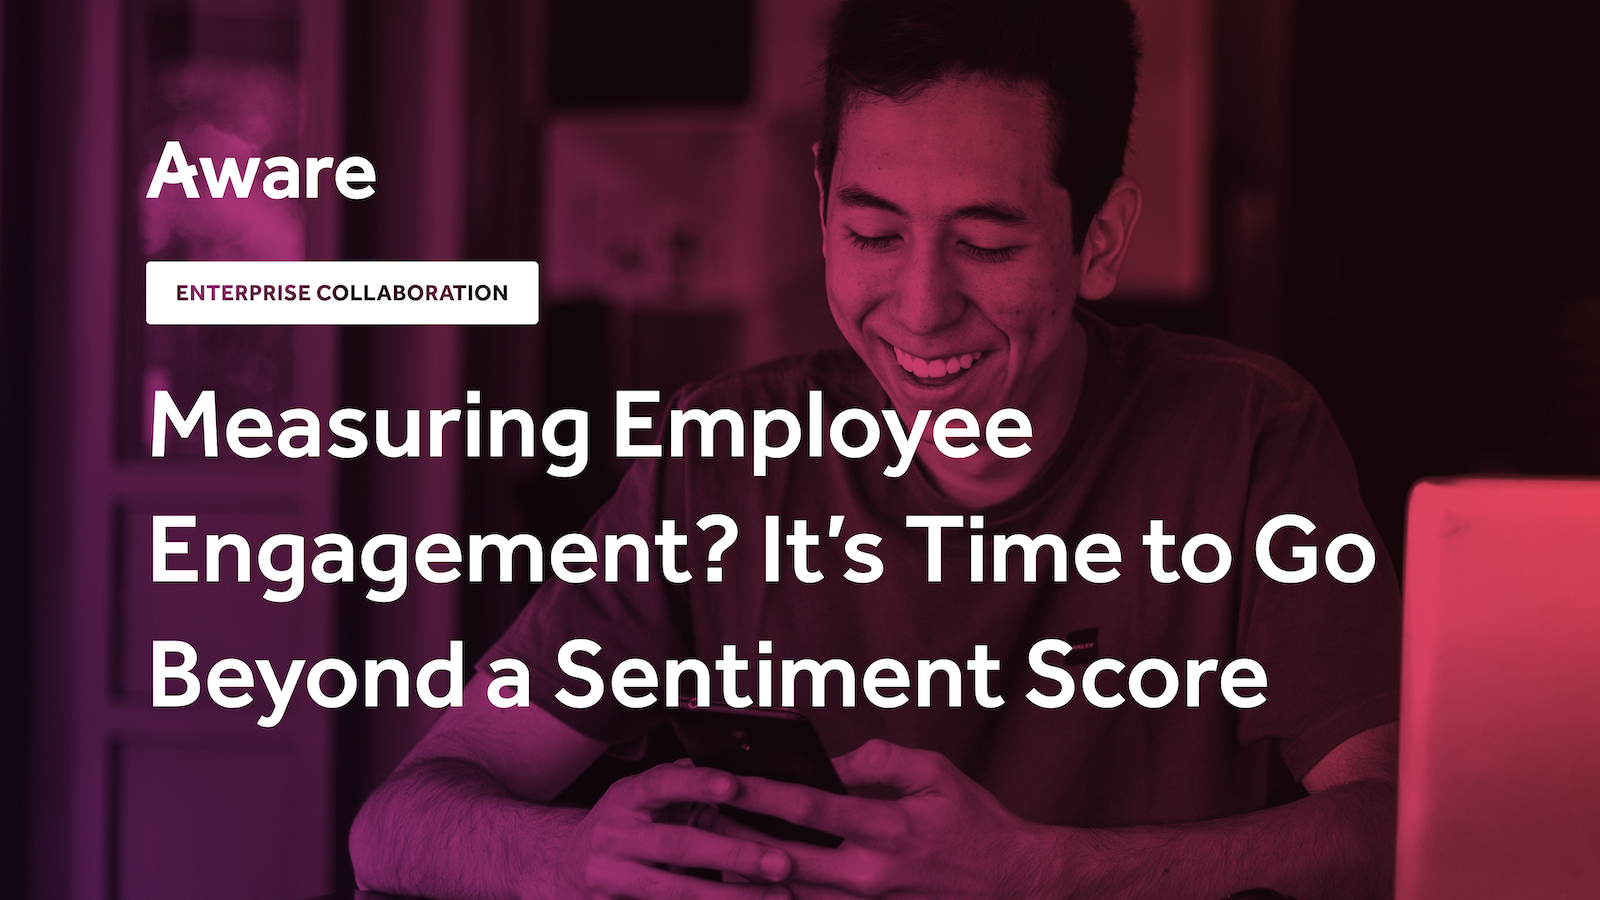 Measuring Employee Engagement? It’s Time to Go Beyond a Sentiment Score